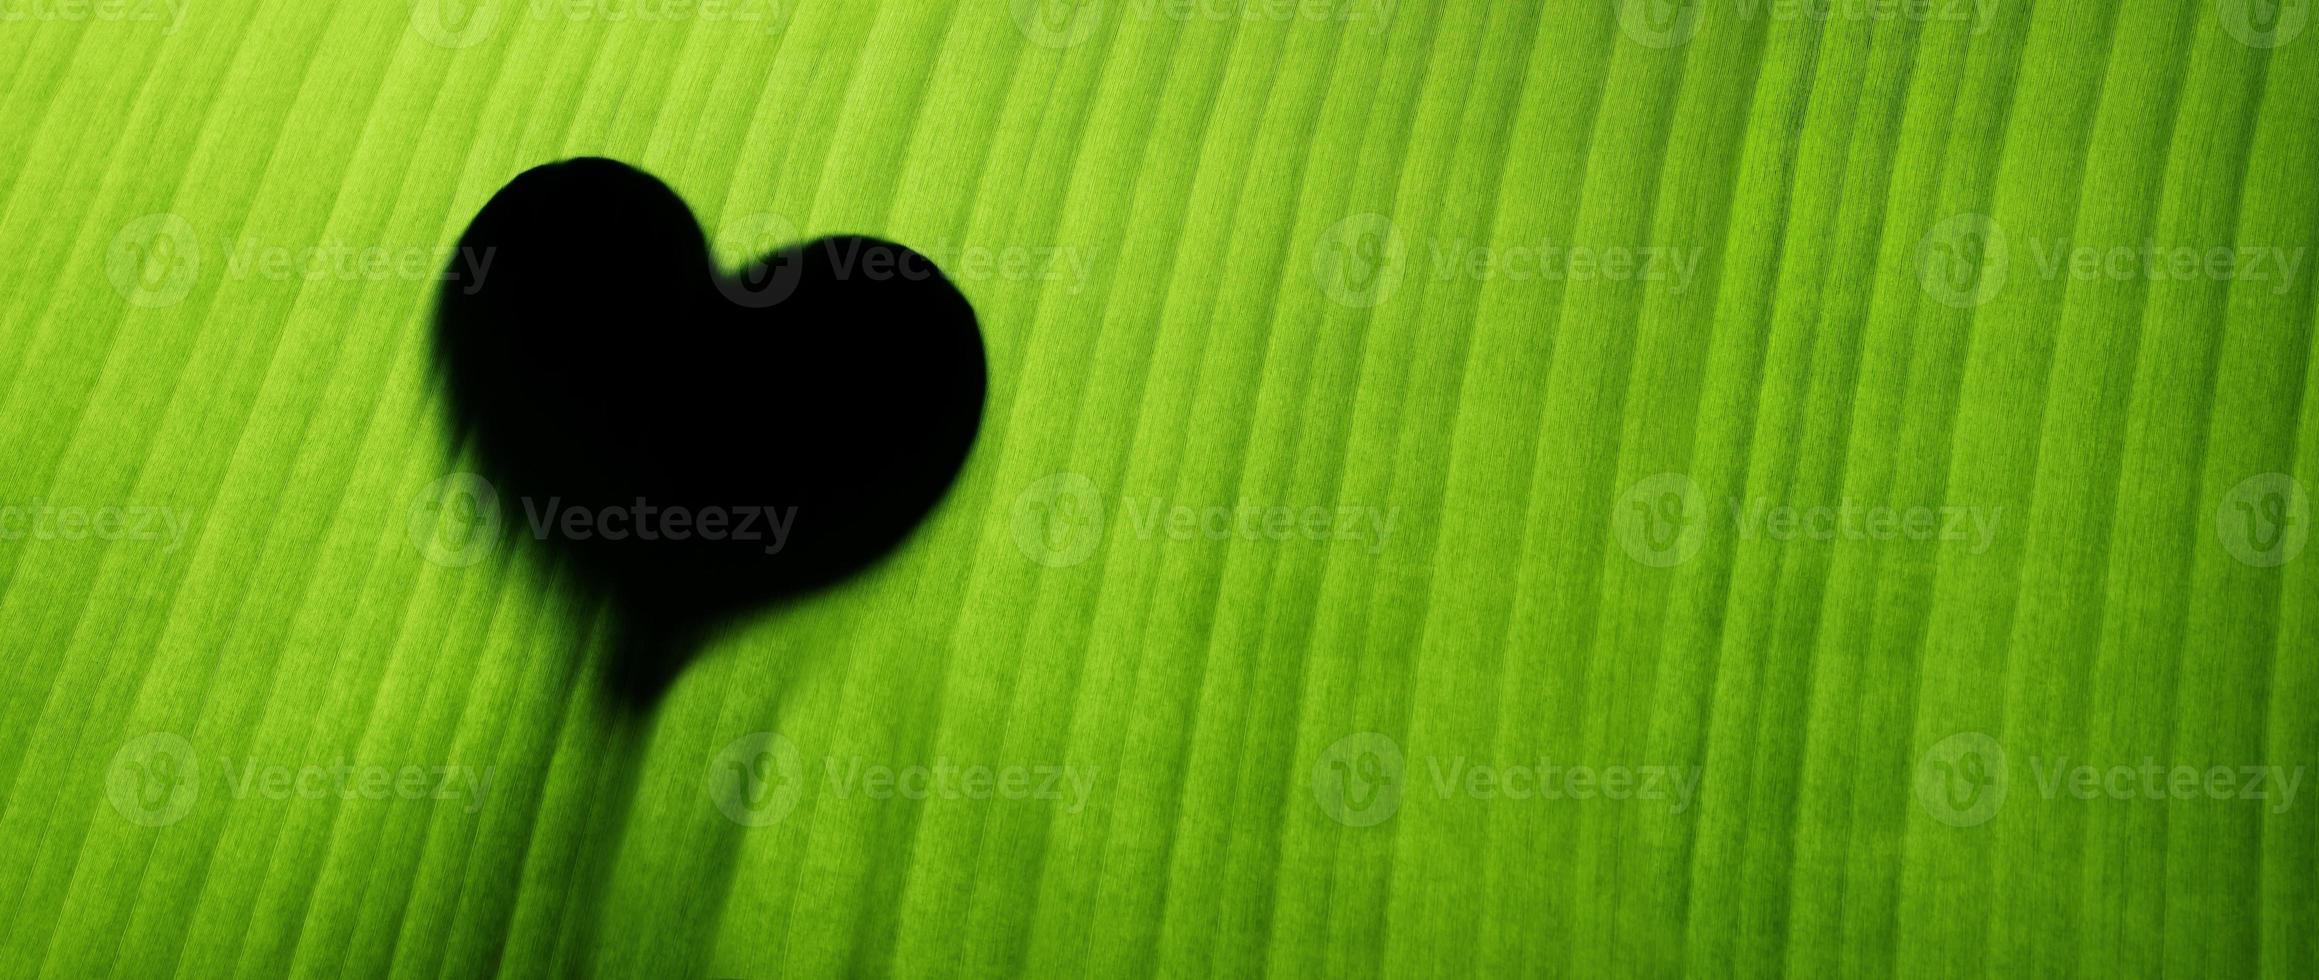 Sustainable Lifestyle Concept. World Environment Day. Green Leaf with Backlit technic as Heart Shape photo